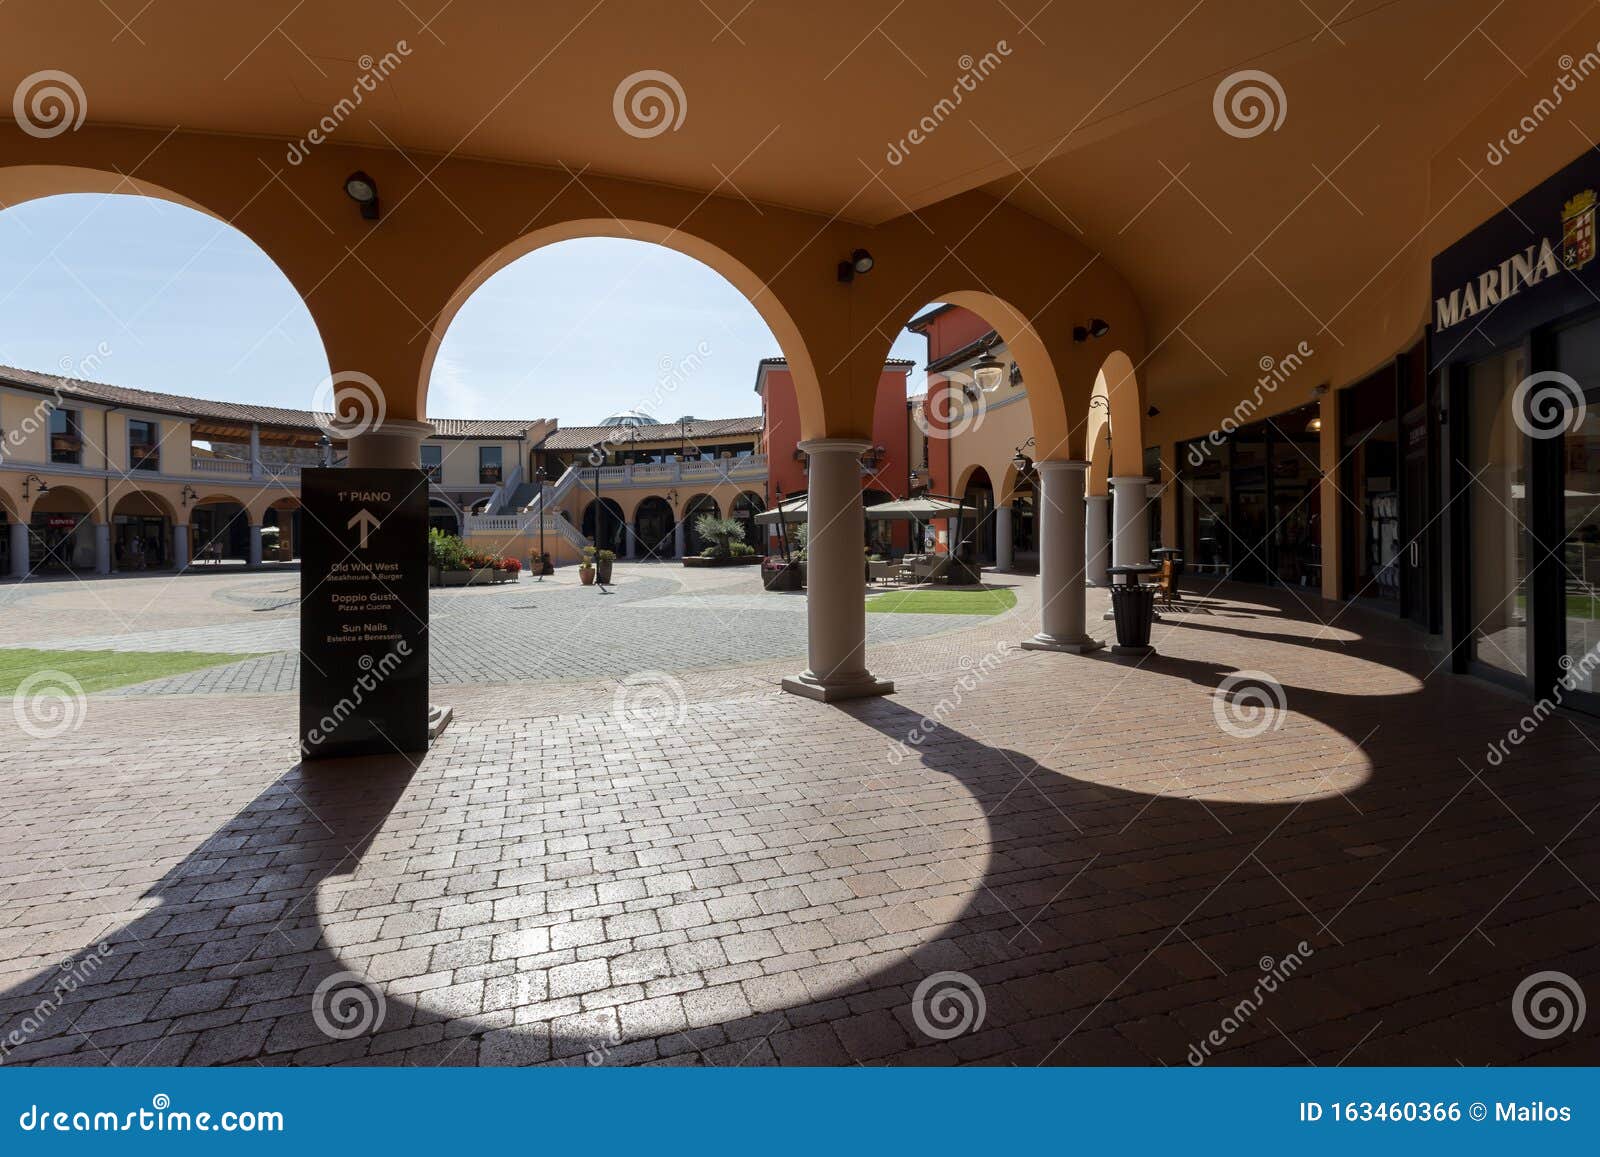 Valdichiana Outlet Village, Italy 09/17/2019: Main Square Of The Shopping Center Editorial Photo ...